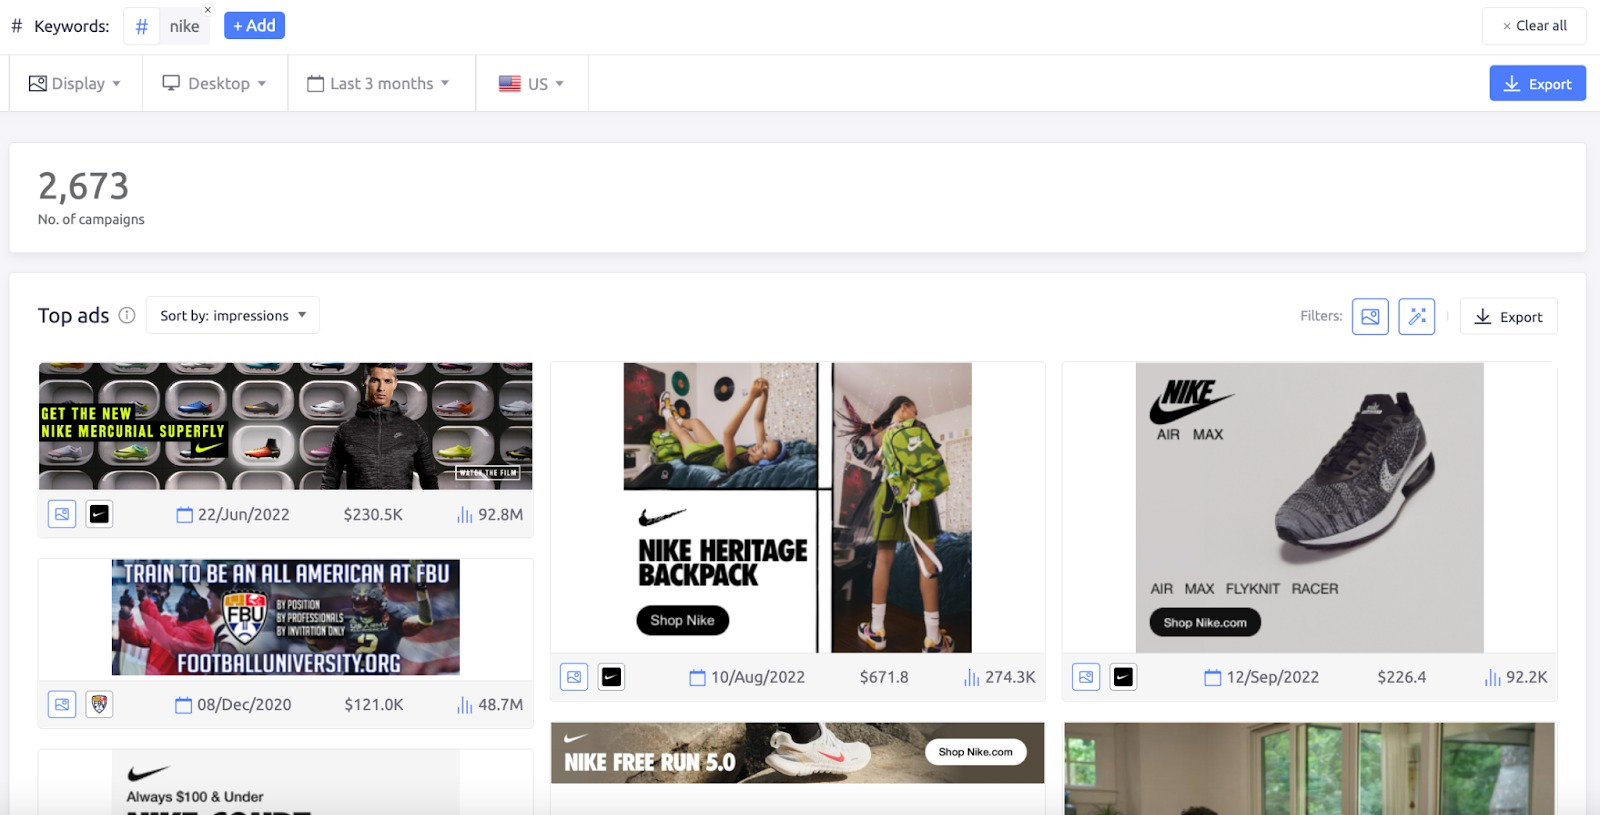 The AdClarity app shows the top display ads for Nike.